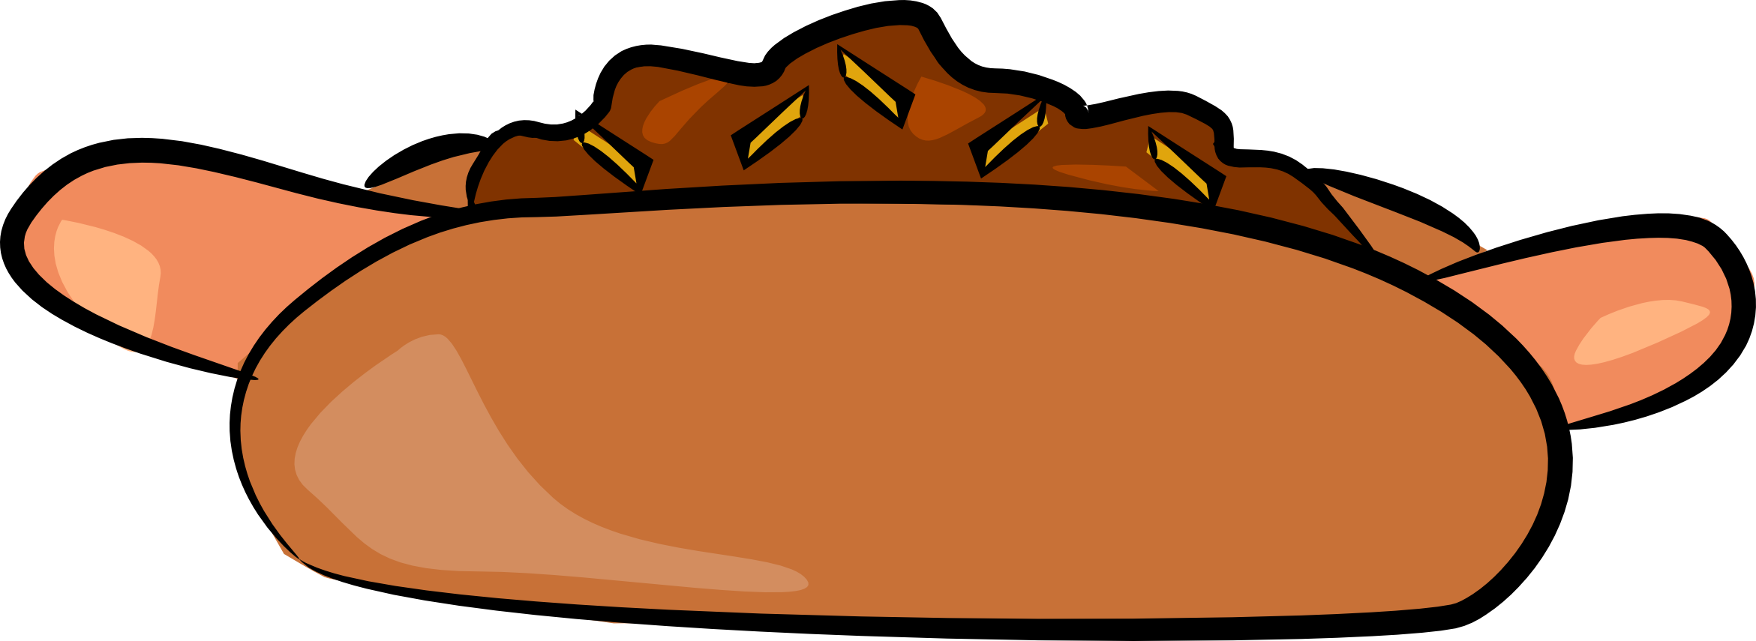 The Totally Free Clip Art Blog: Food - Chili dog - ClipArt Best ...